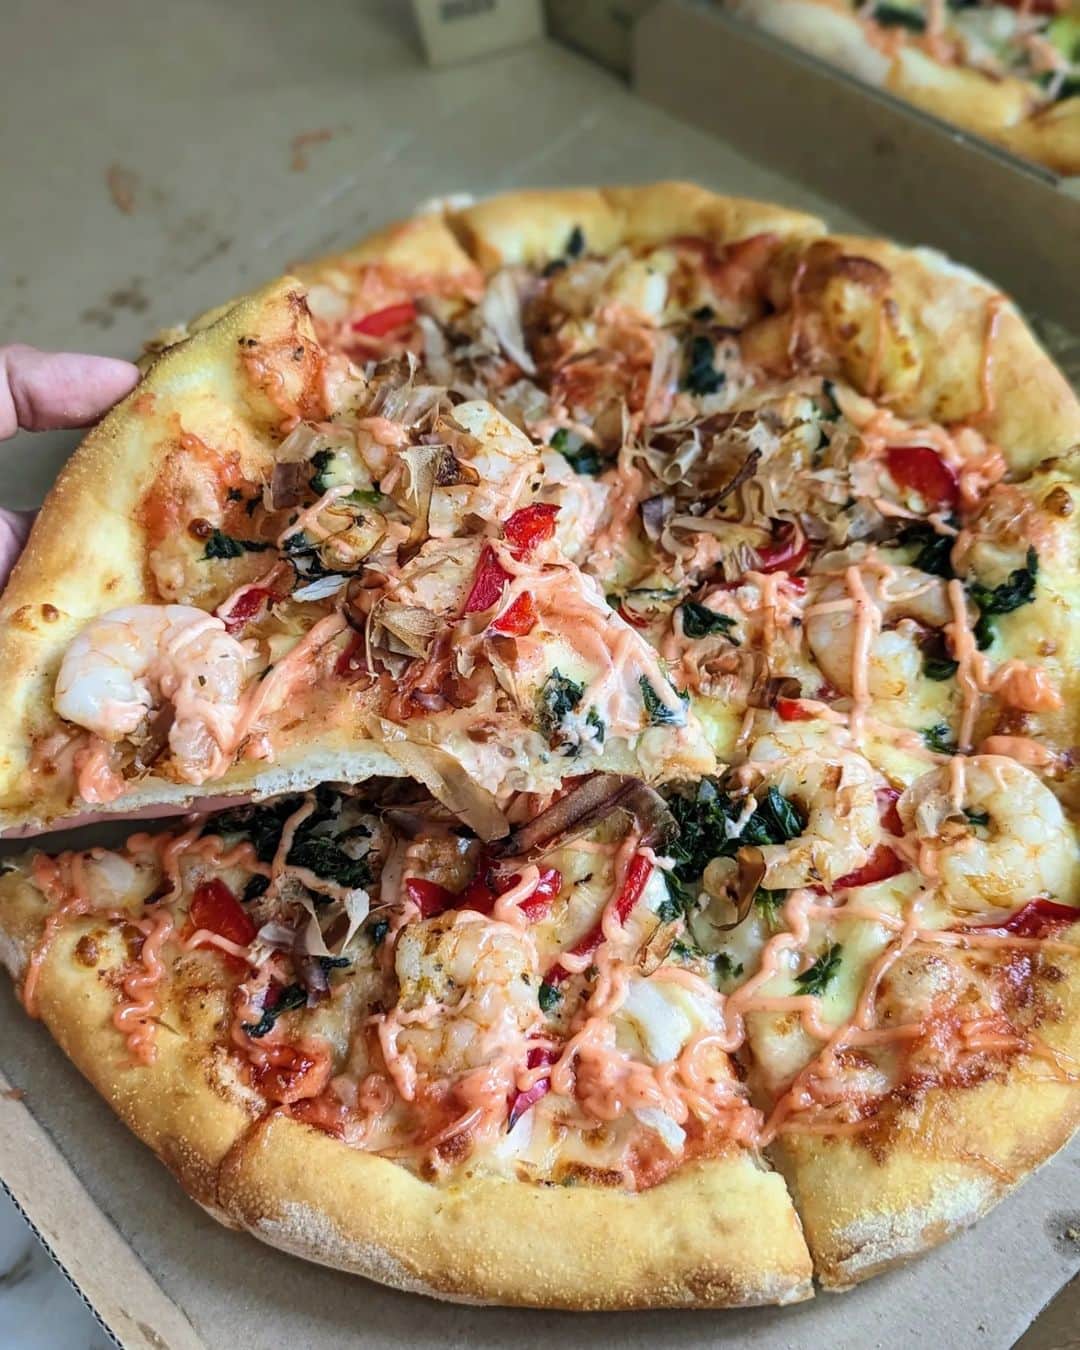 Li Tian の雑貨屋のインスタグラム：「Are u big fan of Mentaiko?  Great news! @dominossg Mentaiko pizzas are back in two flavors - chicken and prawn. Love how creamy the sauce is and the pizzas are topped with lots of other ingredients like cherry tomatoes, spinach and even bonito flakes!   Pizza start from $15.95 and $17.95 respectively for a 9” Regular, and they are available in 12” Large and 15” Extra Large.   Place orders via the Domino’s Singapore to enjoy an in-app exclusive deal for the 9”  Regular Chicken Bon-taiko Pizza at just $5*.  Ride on the 50% off promotion for the 9” Regular pizzas (U.P $25.90) simply by topping up $3 for the Chicken Bon-taiko Pizza and $5 for the Prawn Bon-taiko Pizza.   #sgpizza #sg #singapore #pizza」